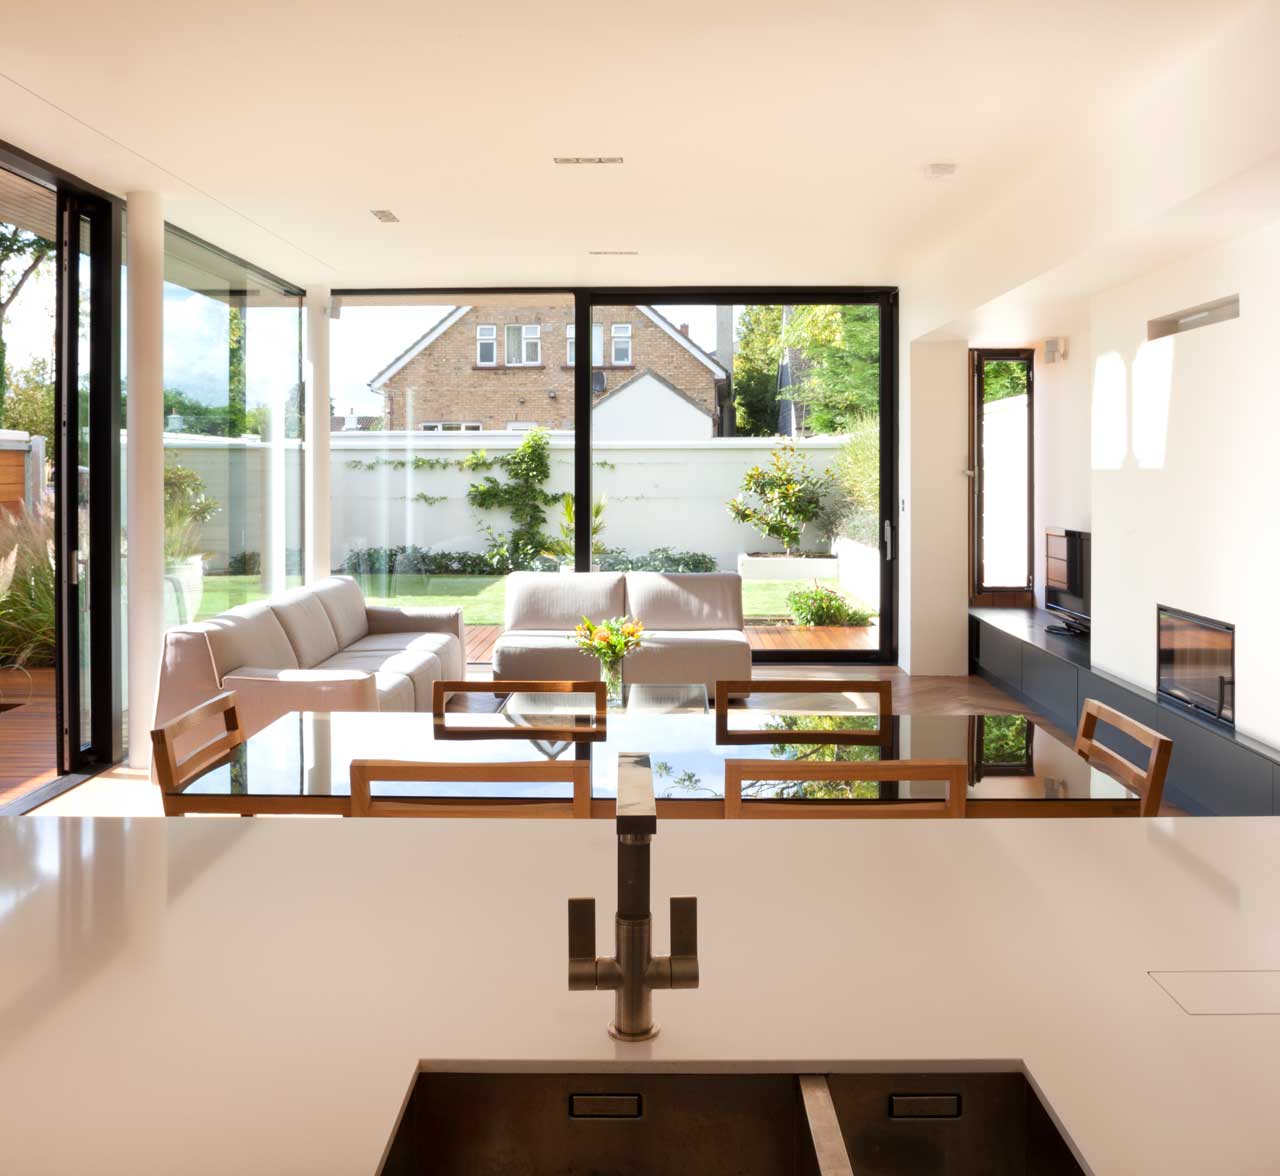 View from the kitchen of the dinning table and the living room located at Hazel lane, County Dublin designed by 'Dublin Design Studio'